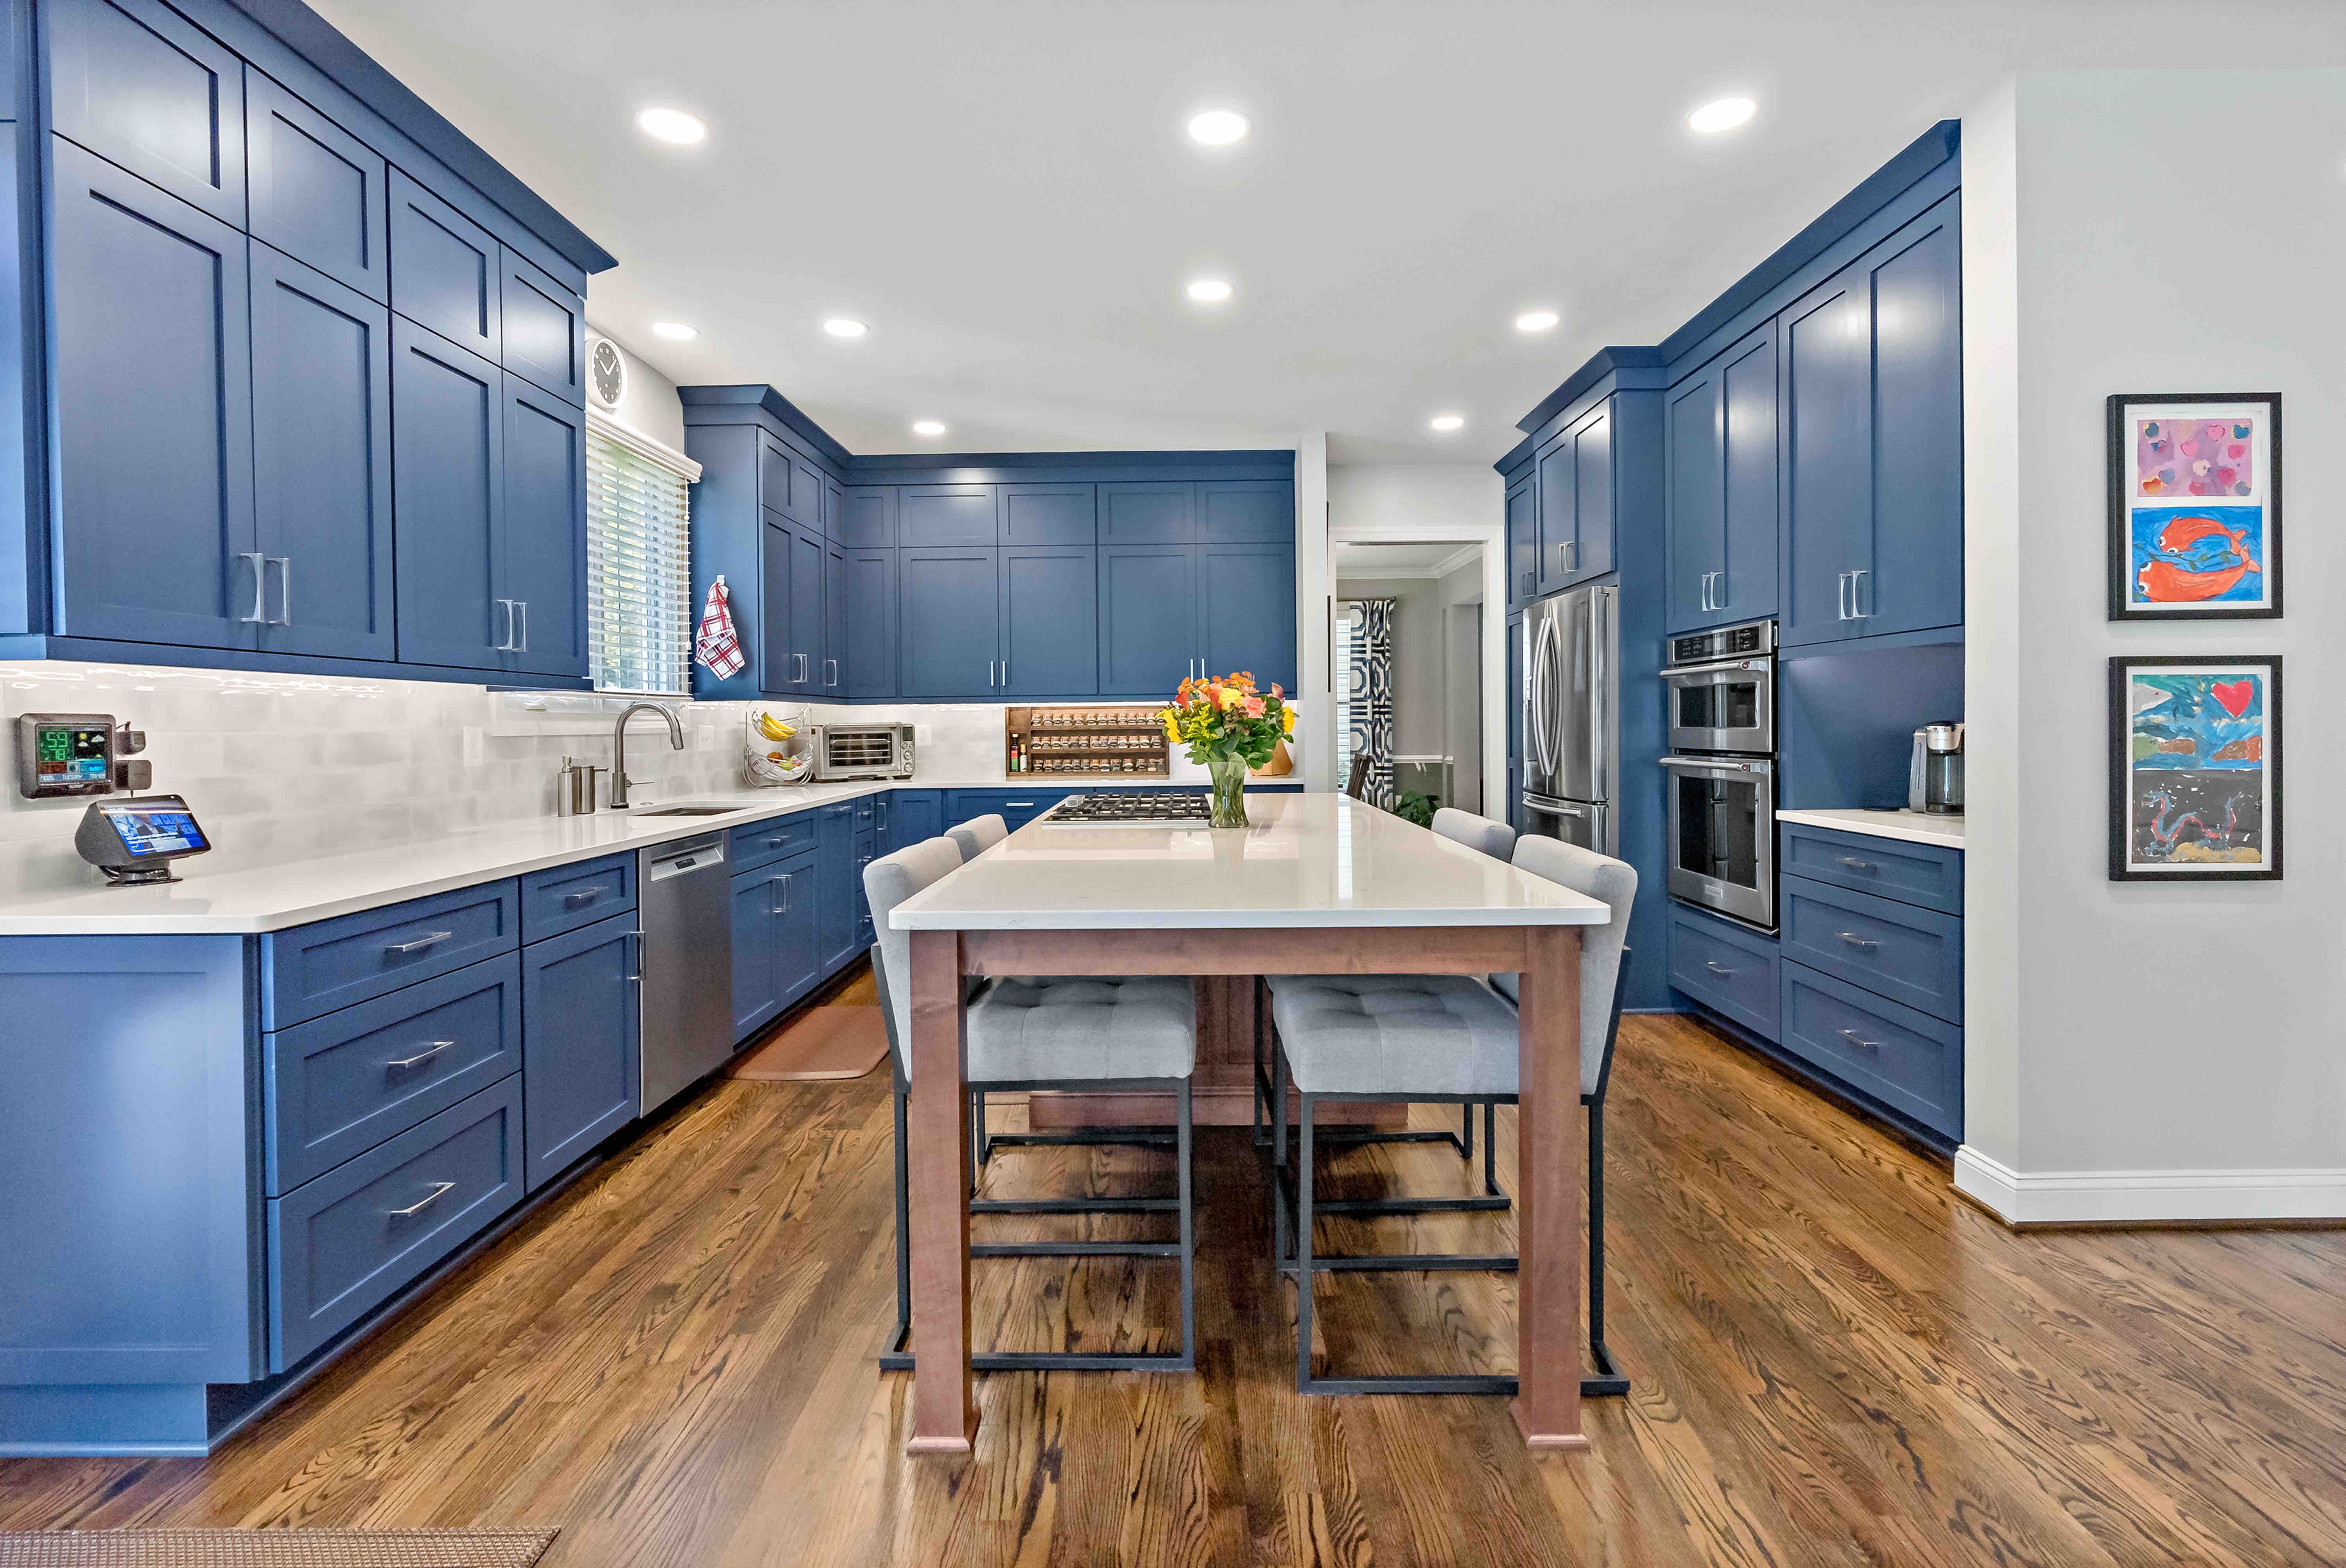 Spacious blue kitchen with hard wood floors